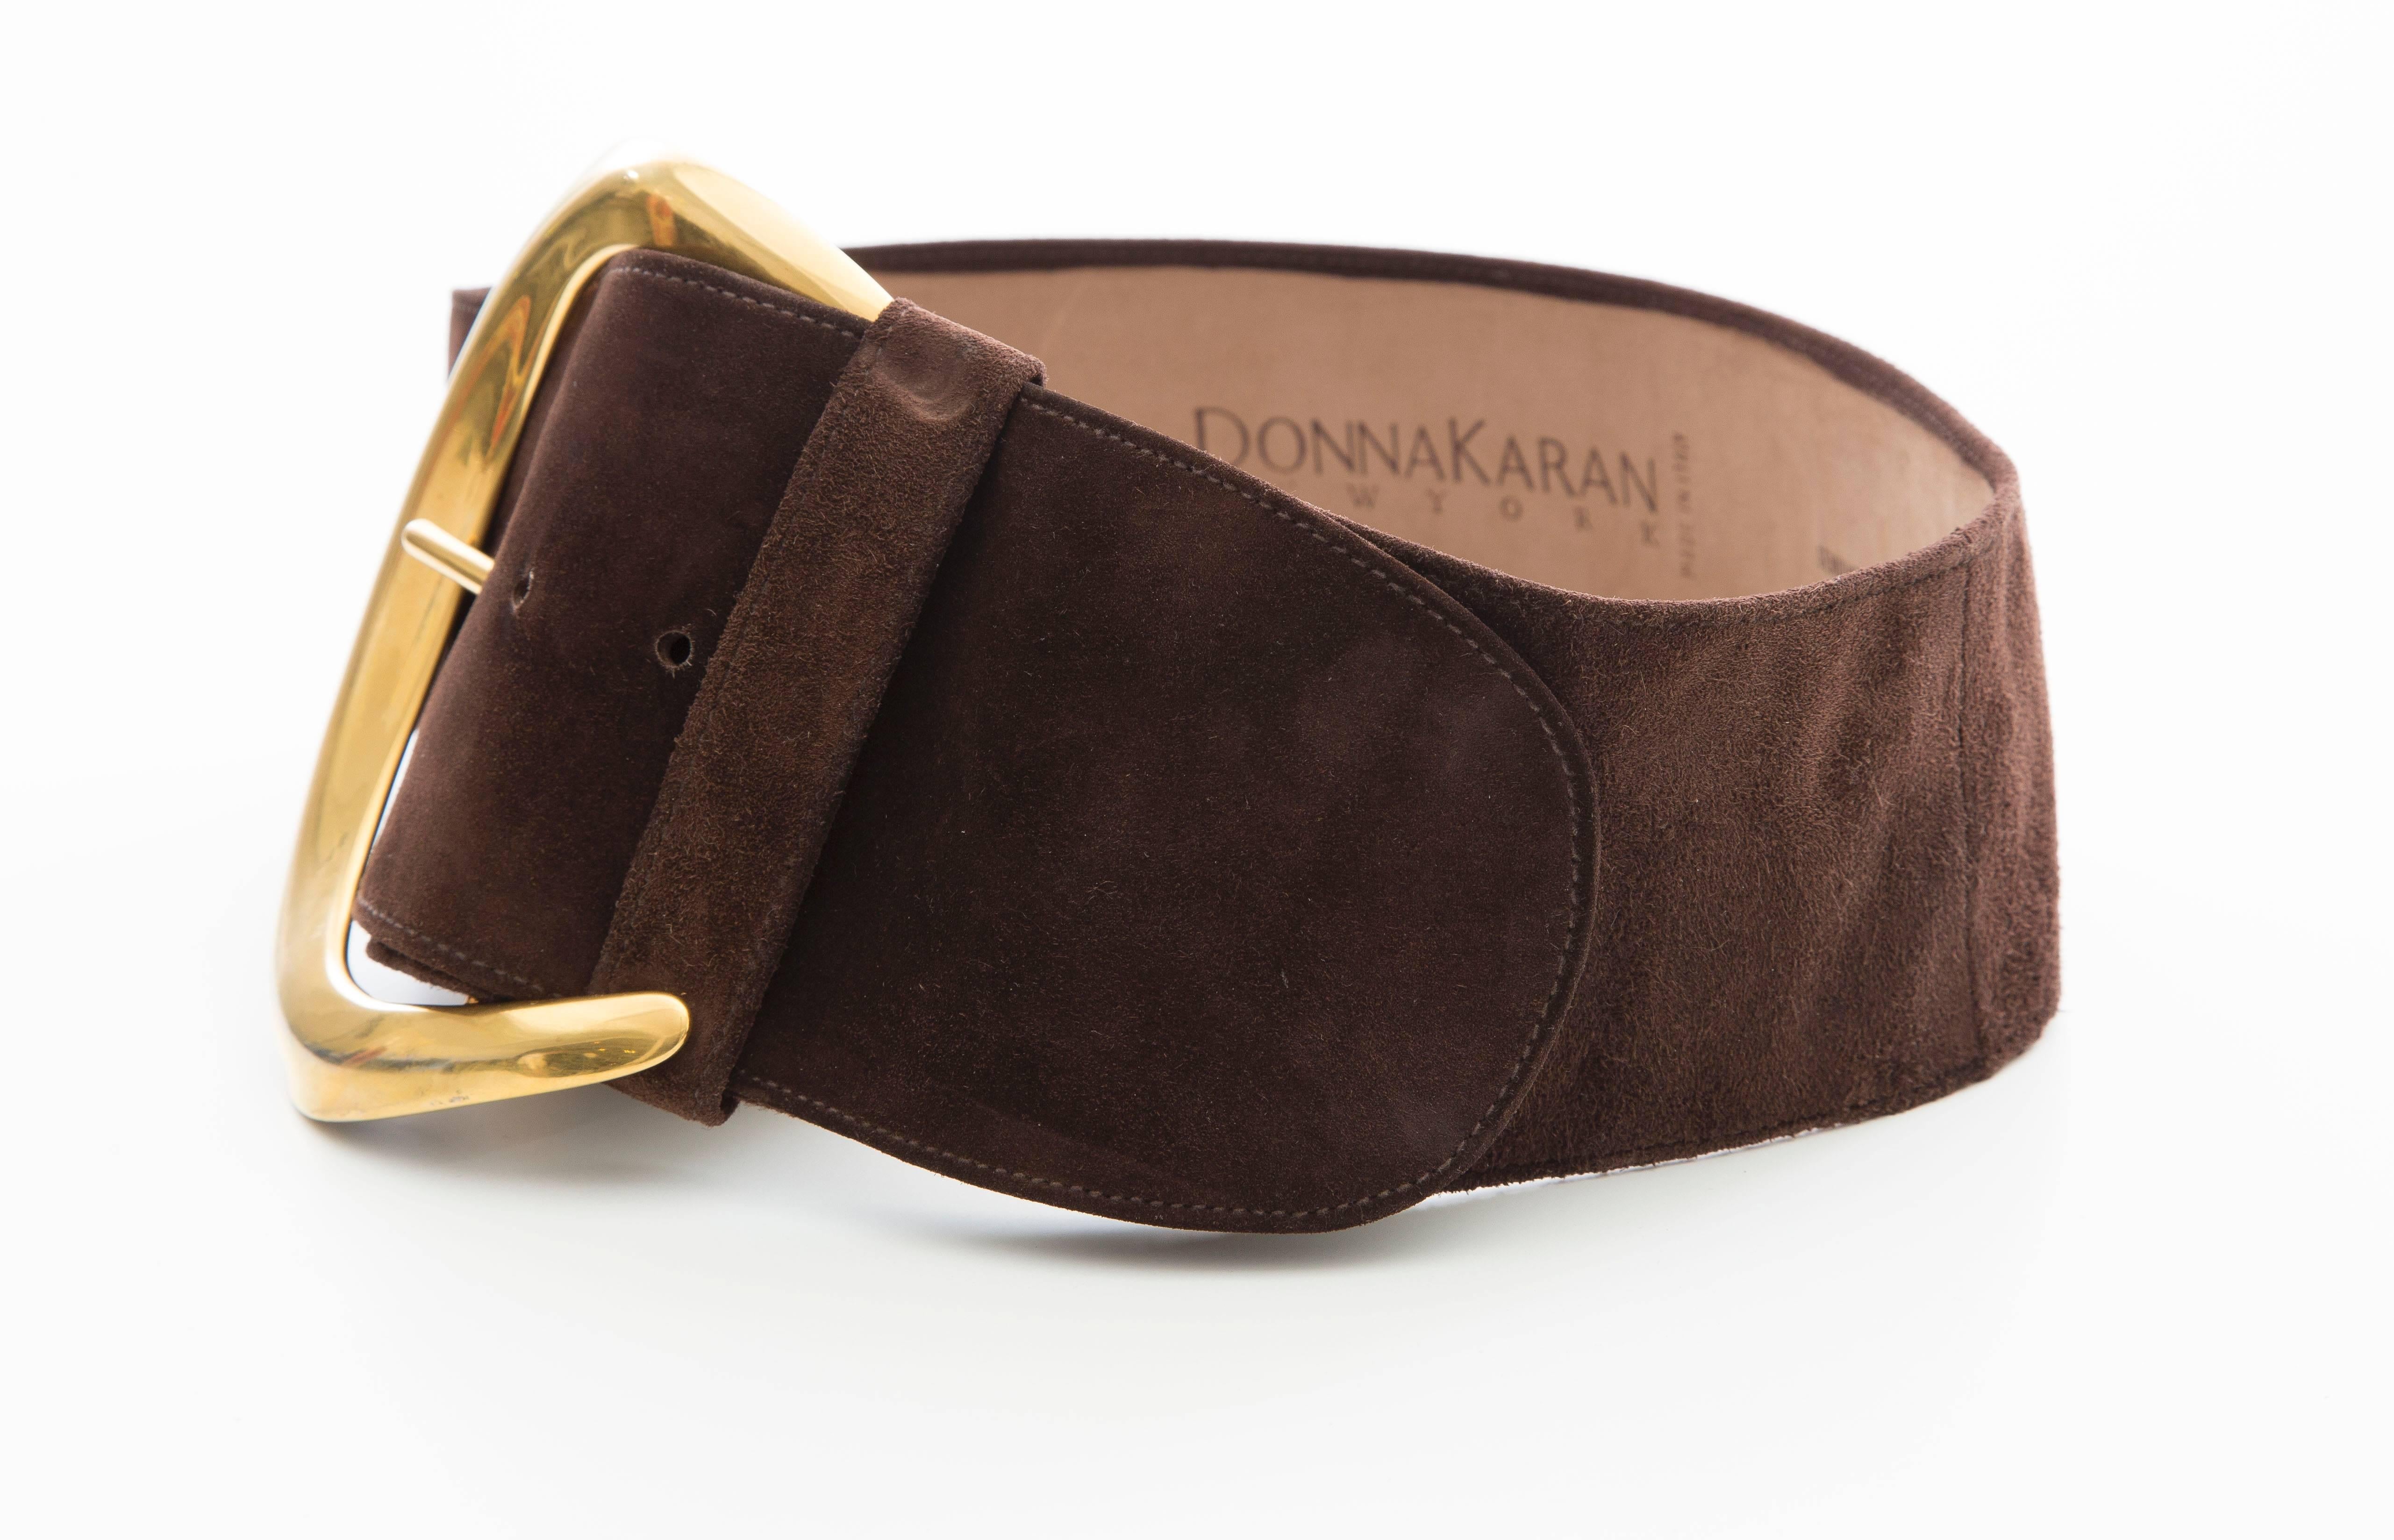 Donna Karan, circa 1980's brown suede leather belt with gold tone buckle designed by Robert Lee Morris.